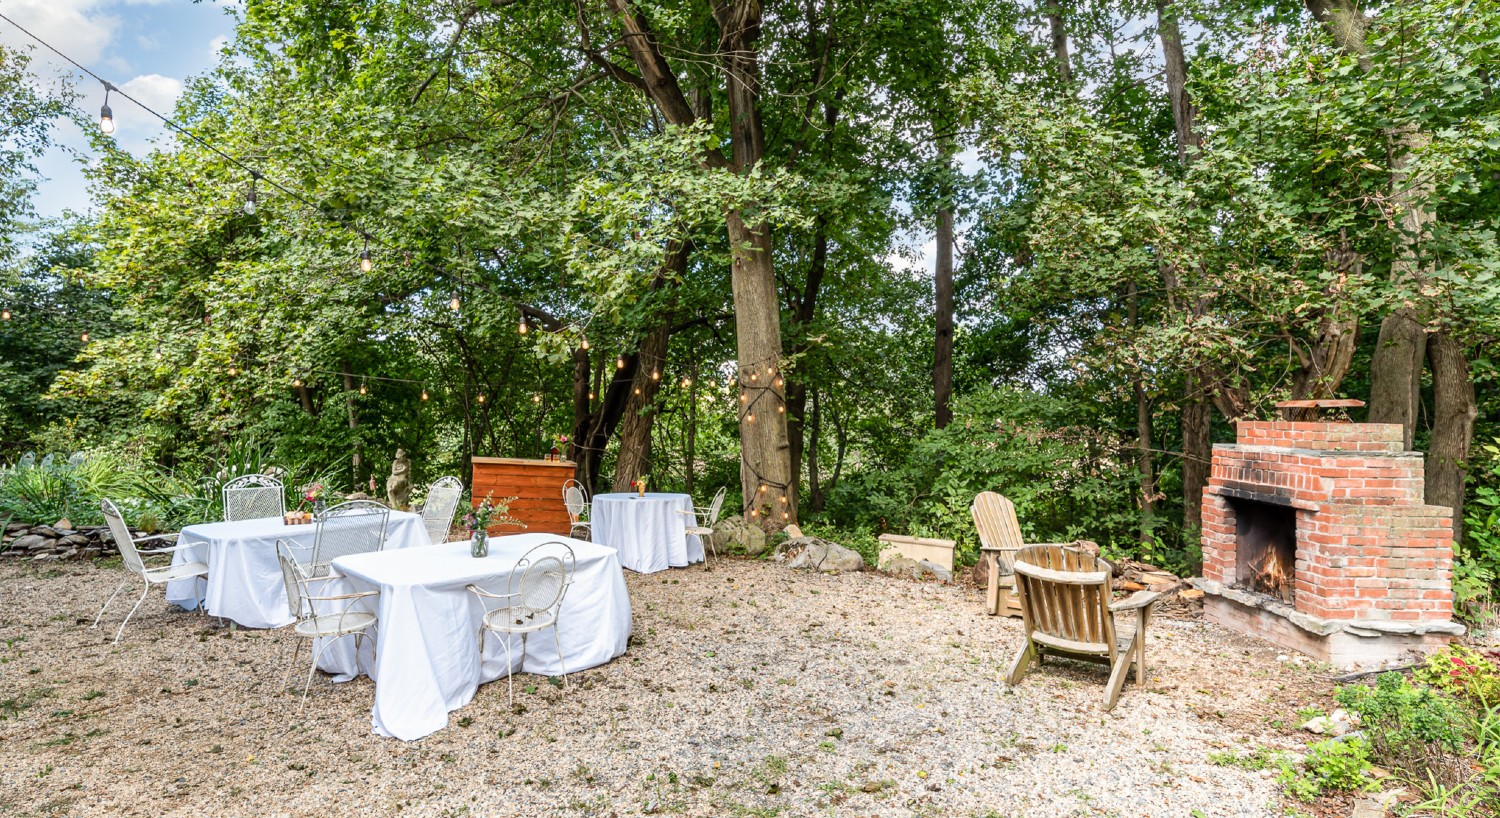 Outdoor firepit area with two adirondack chairs and tables with white cloth and patio chairs